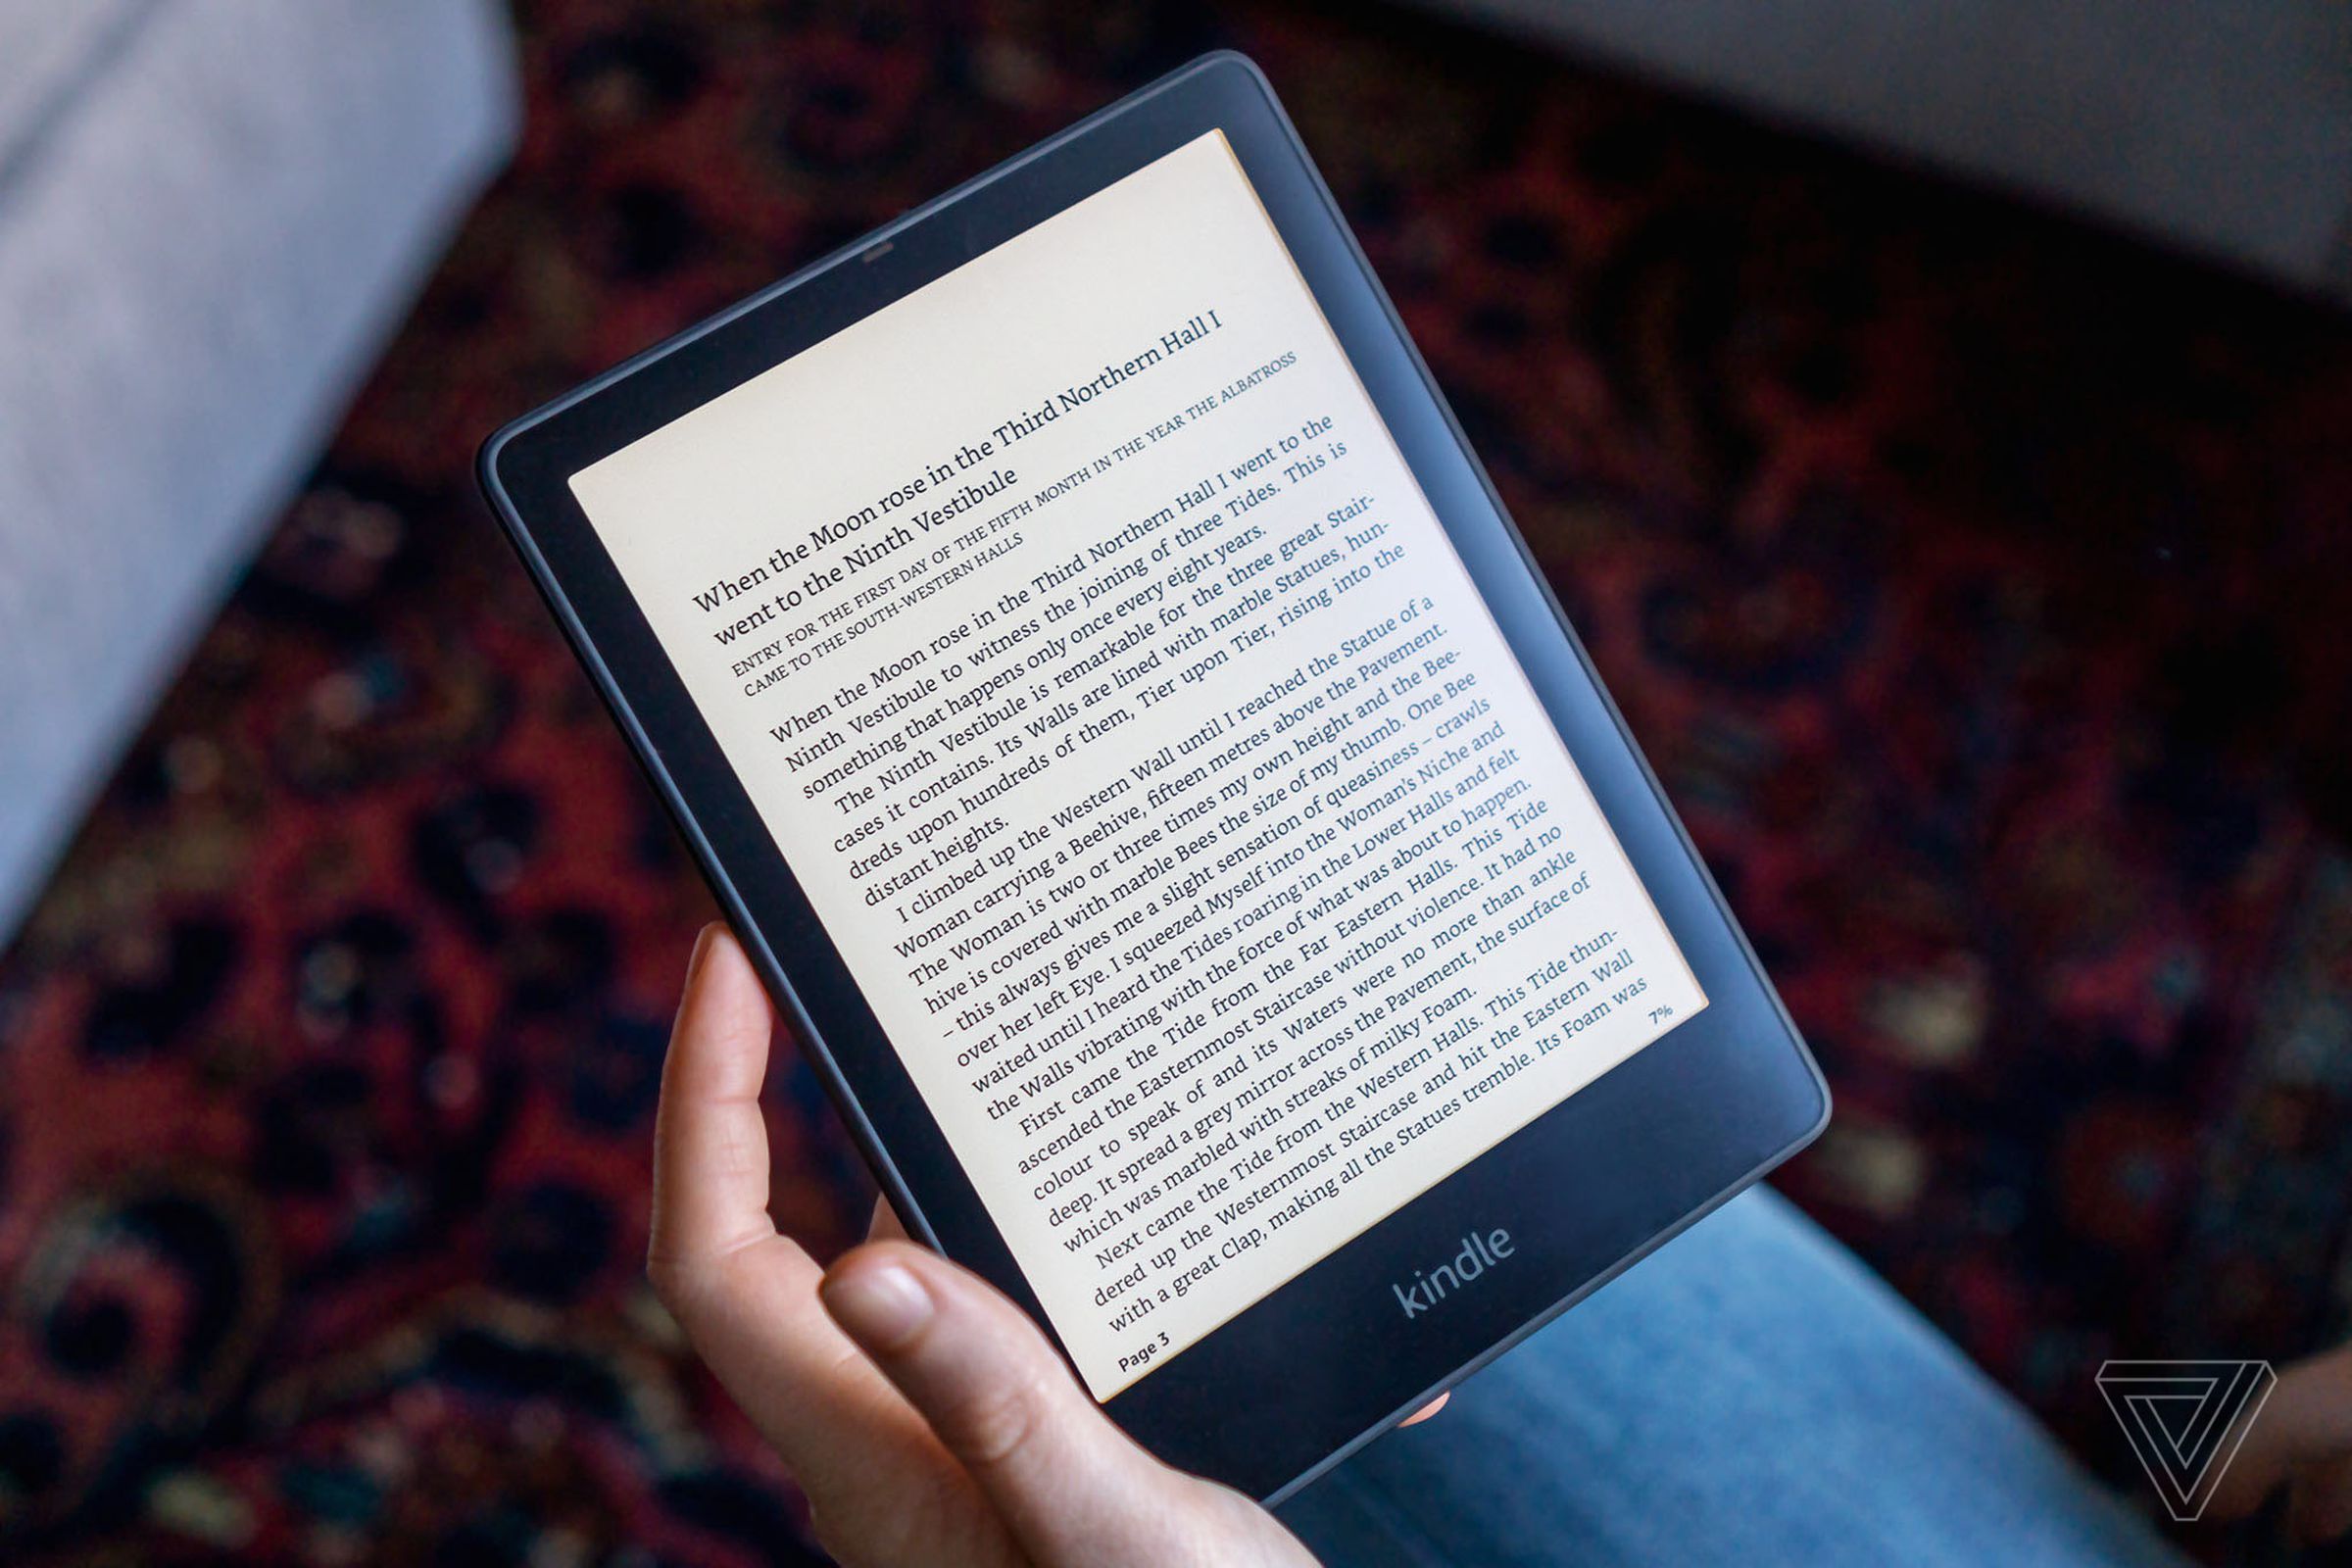 The Kindle Paperwhite Signature Edition is identical to the standard model but features wireless charging and a sensor to automatically adjust the backlight.